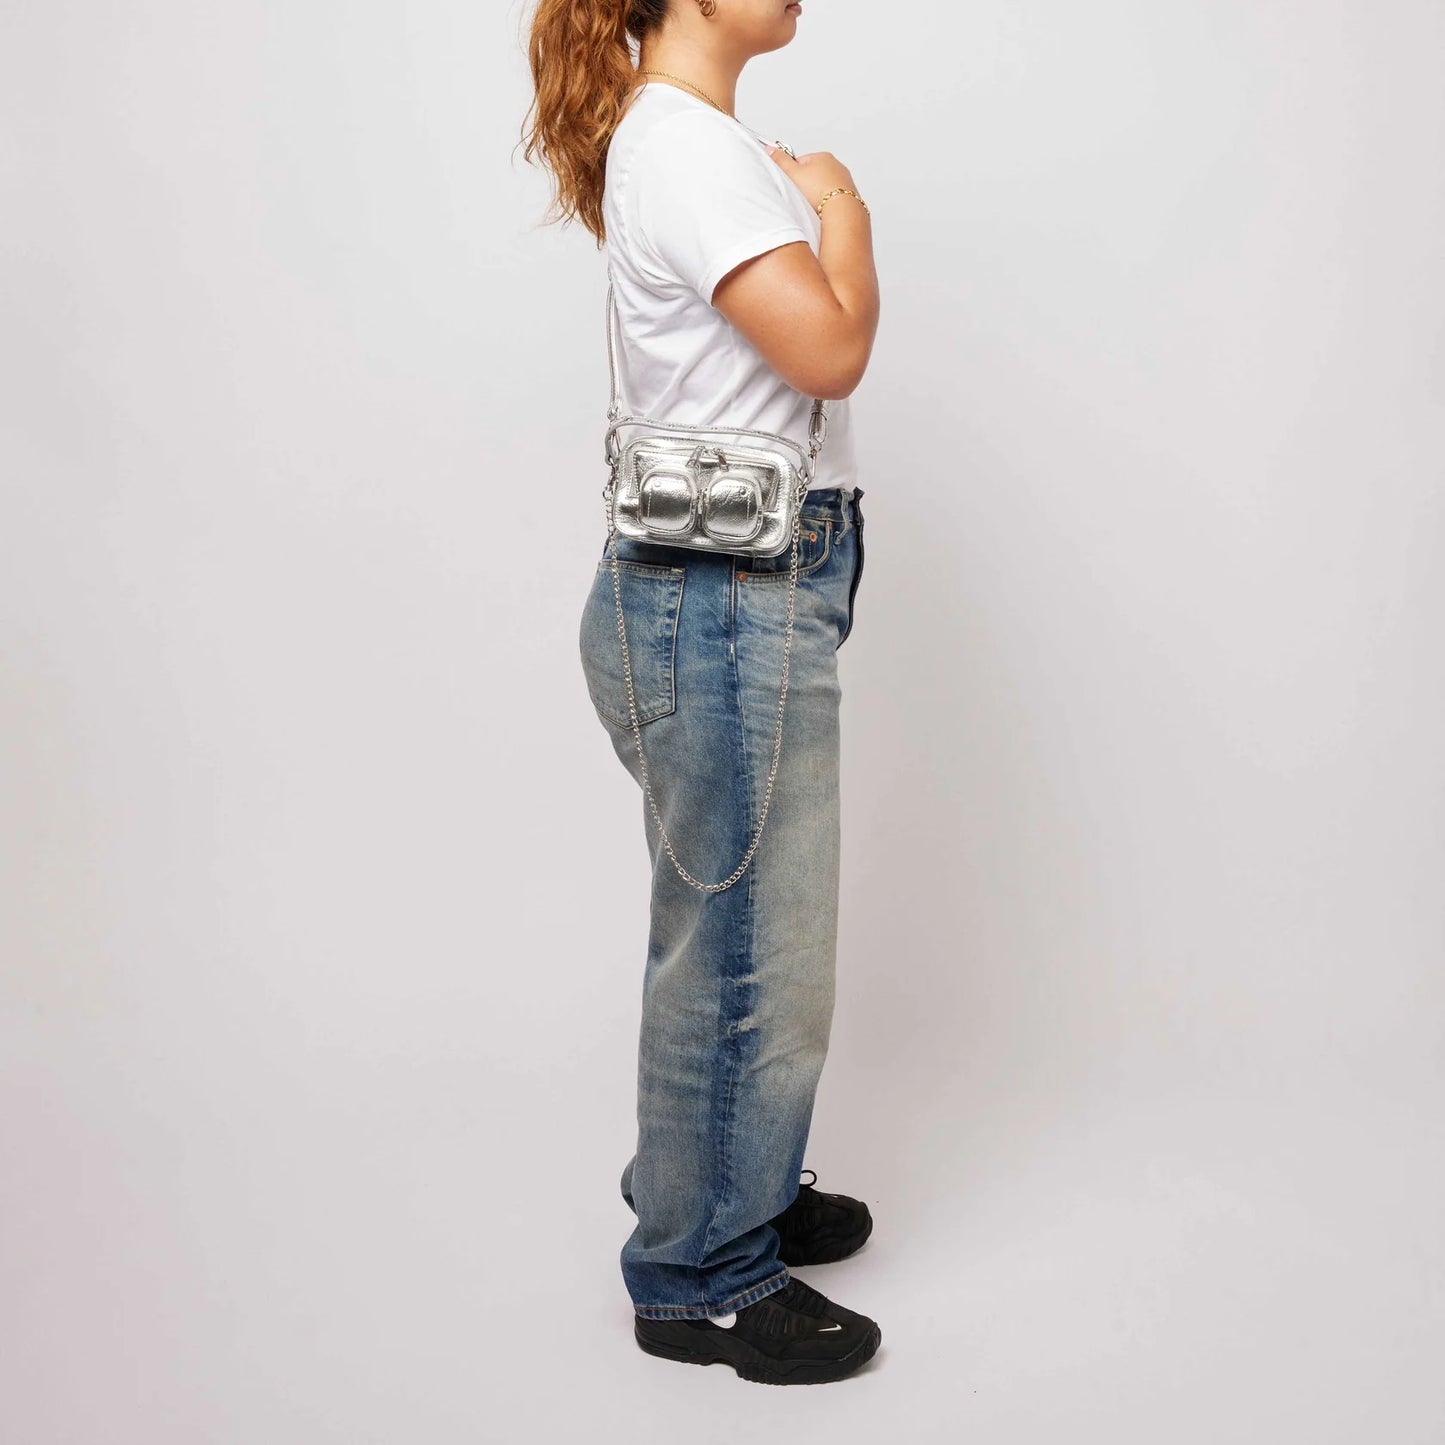 NUNOO | SMALL WOMAN SAC | HELENA RECYCLED COOL SILVER | ARGENT